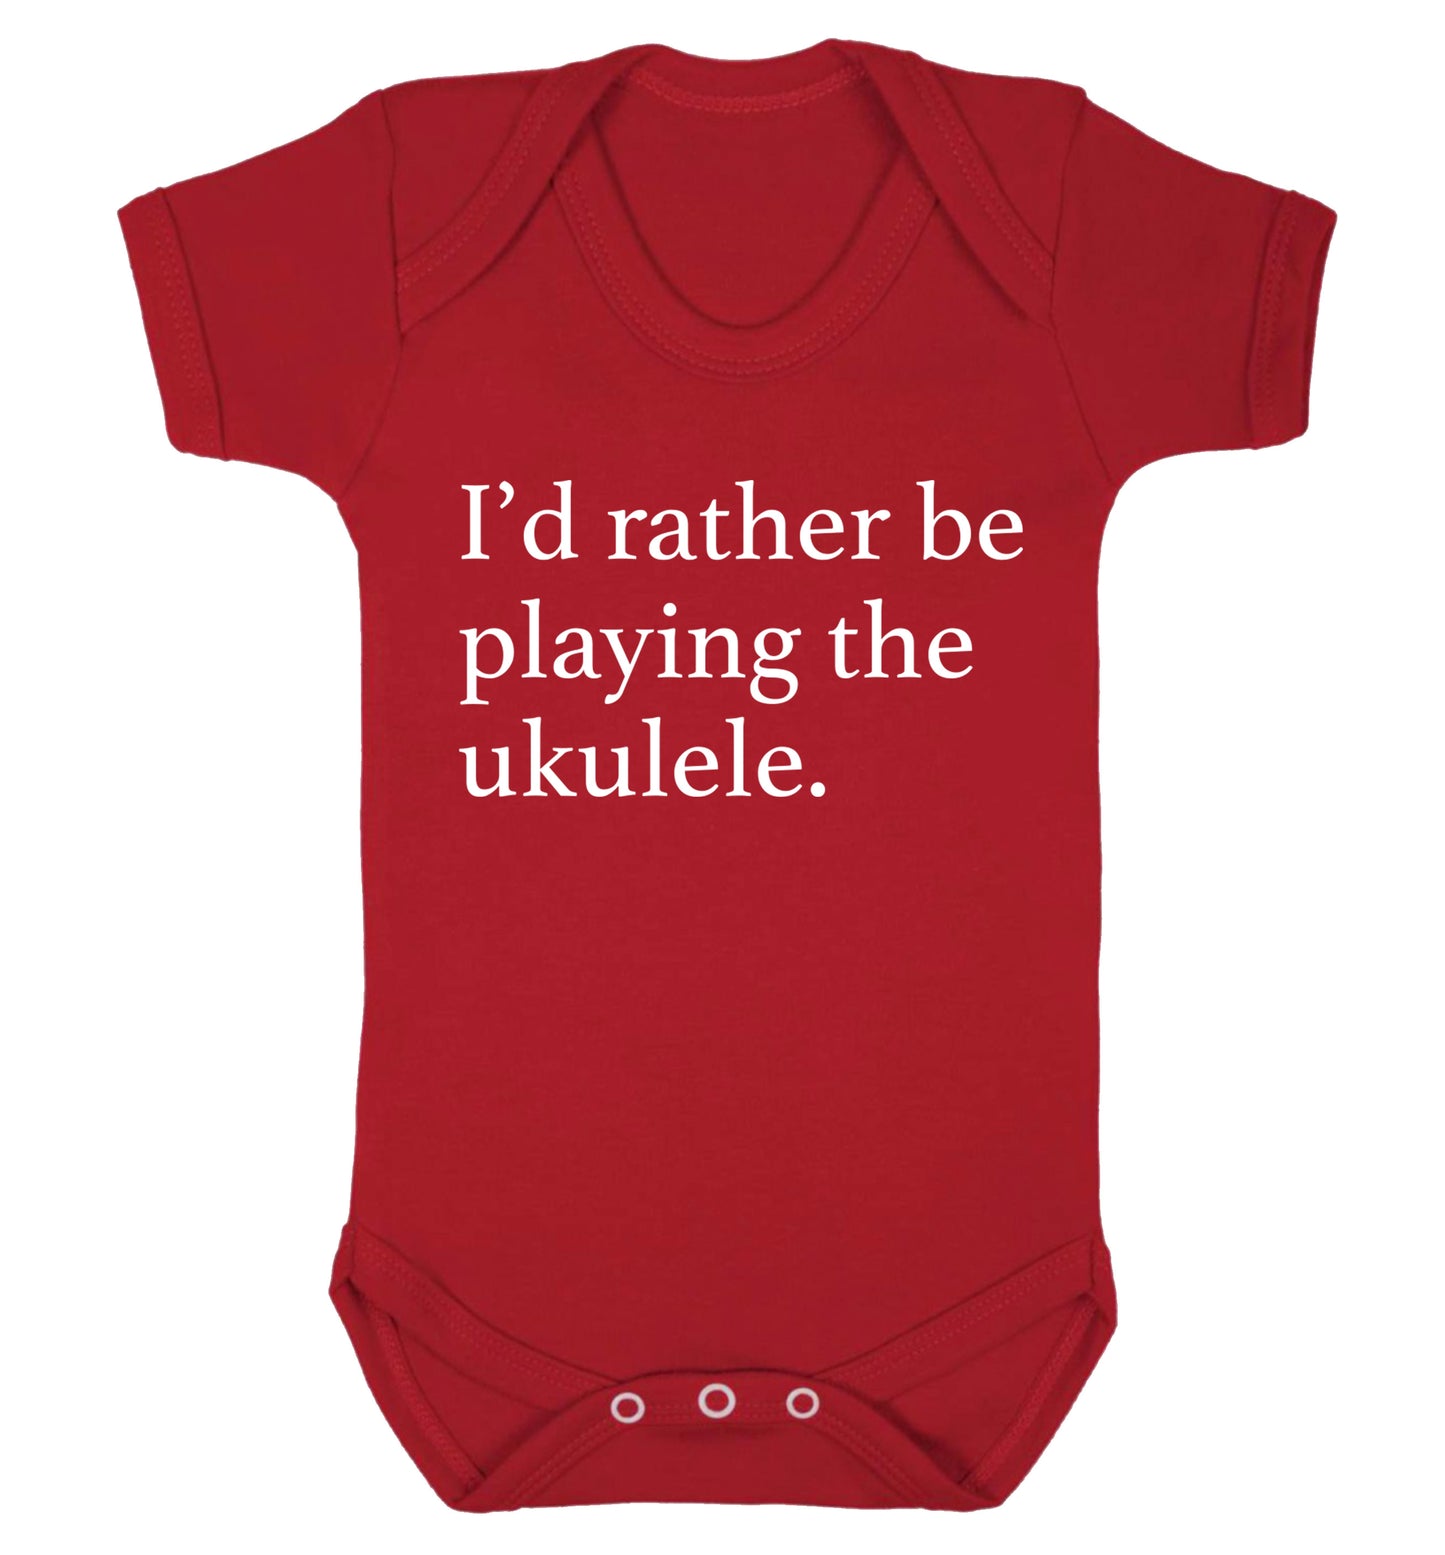 I'd rather by playing the ukulele Baby Vest red 18-24 months